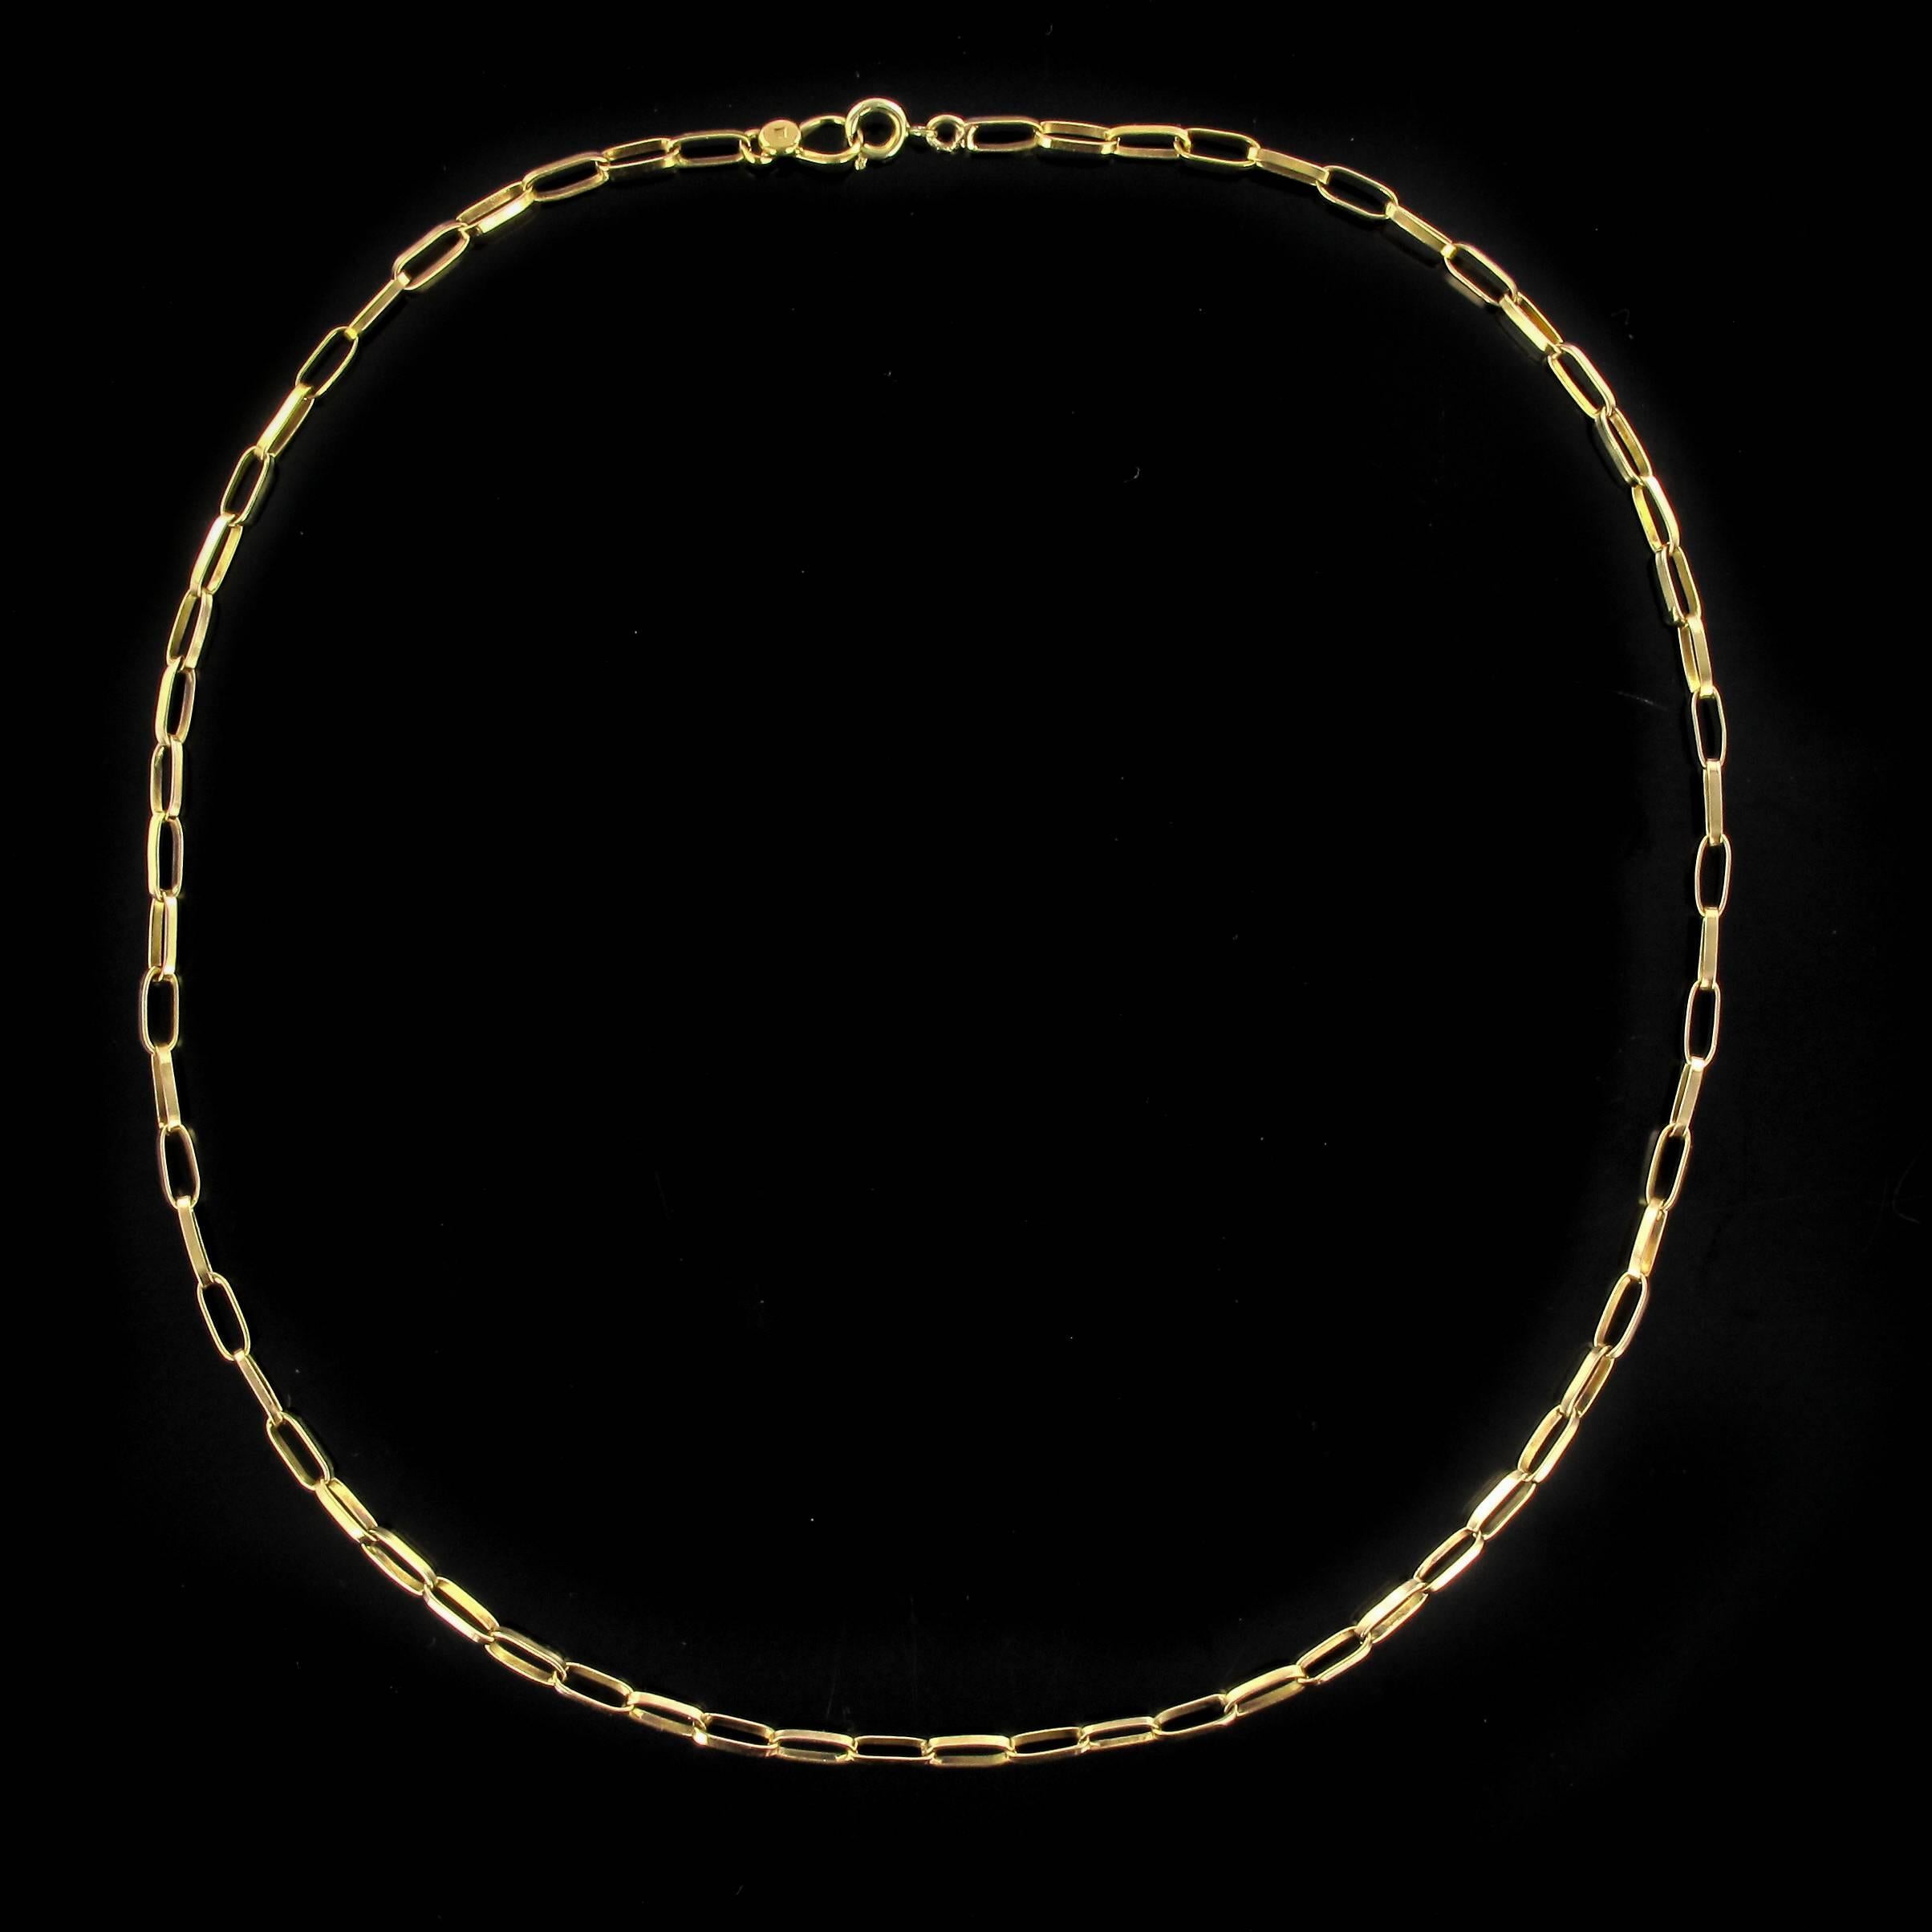 Chain in 18 karats yellow gold.
Length: 44 cm, link width: about 3 mm.
Weight: 6.7 g approximately.
Mesh type: staple
Clasp: spring ring.